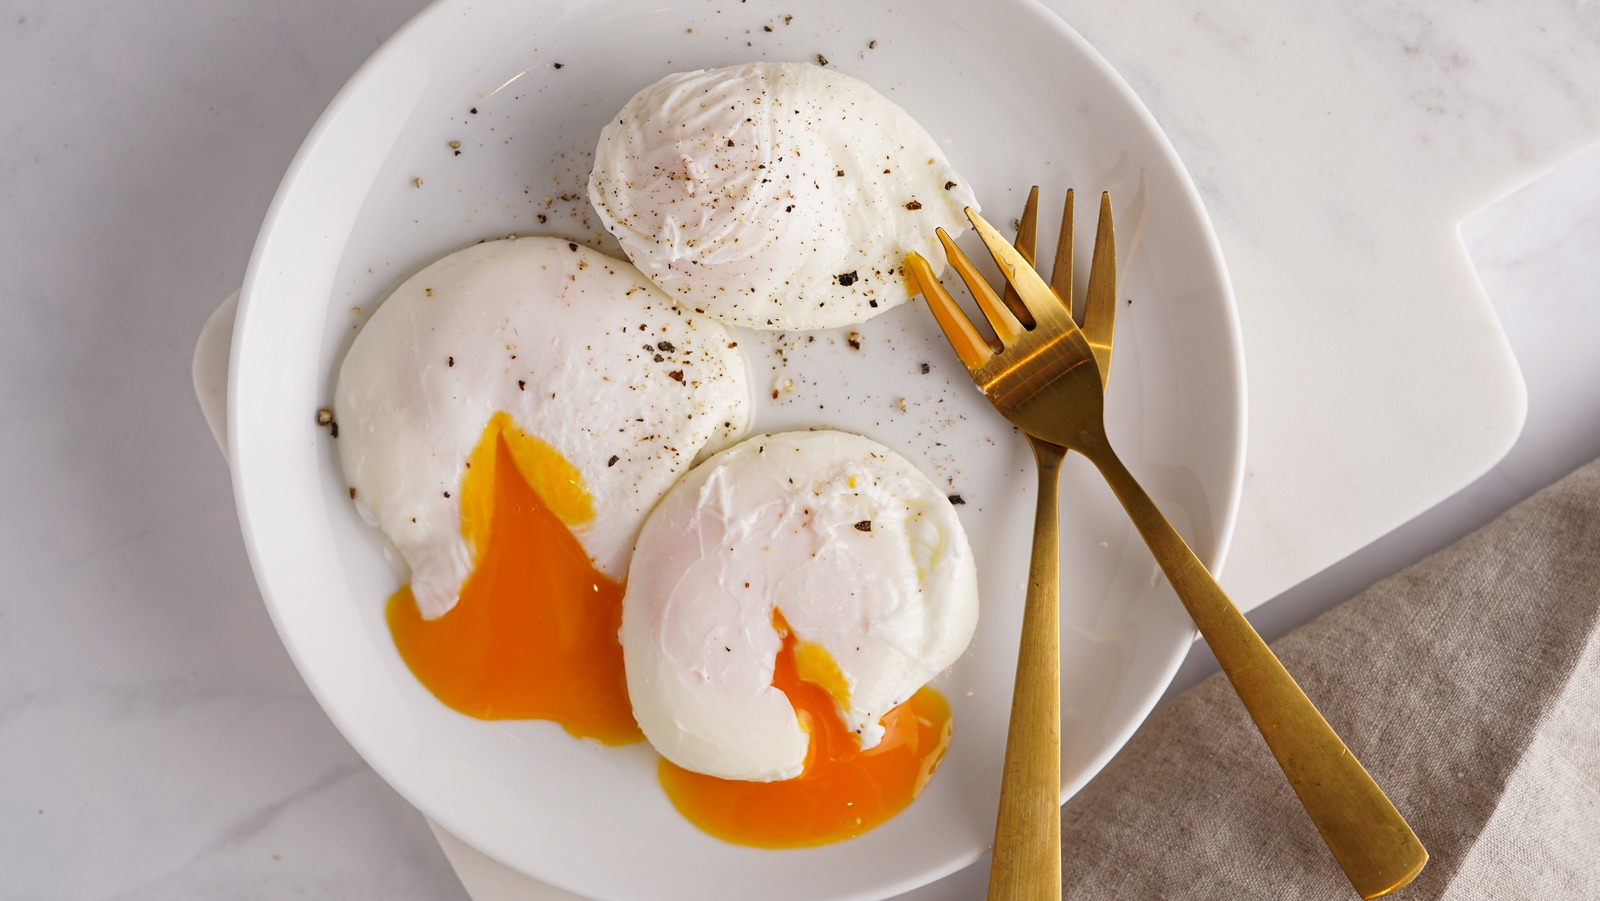 https://www.tastingtable.com/img/gallery/the-super-easy-way-to-cook-poached-eggs-in-the-air-fryer/l-intro-1686695307.jpg